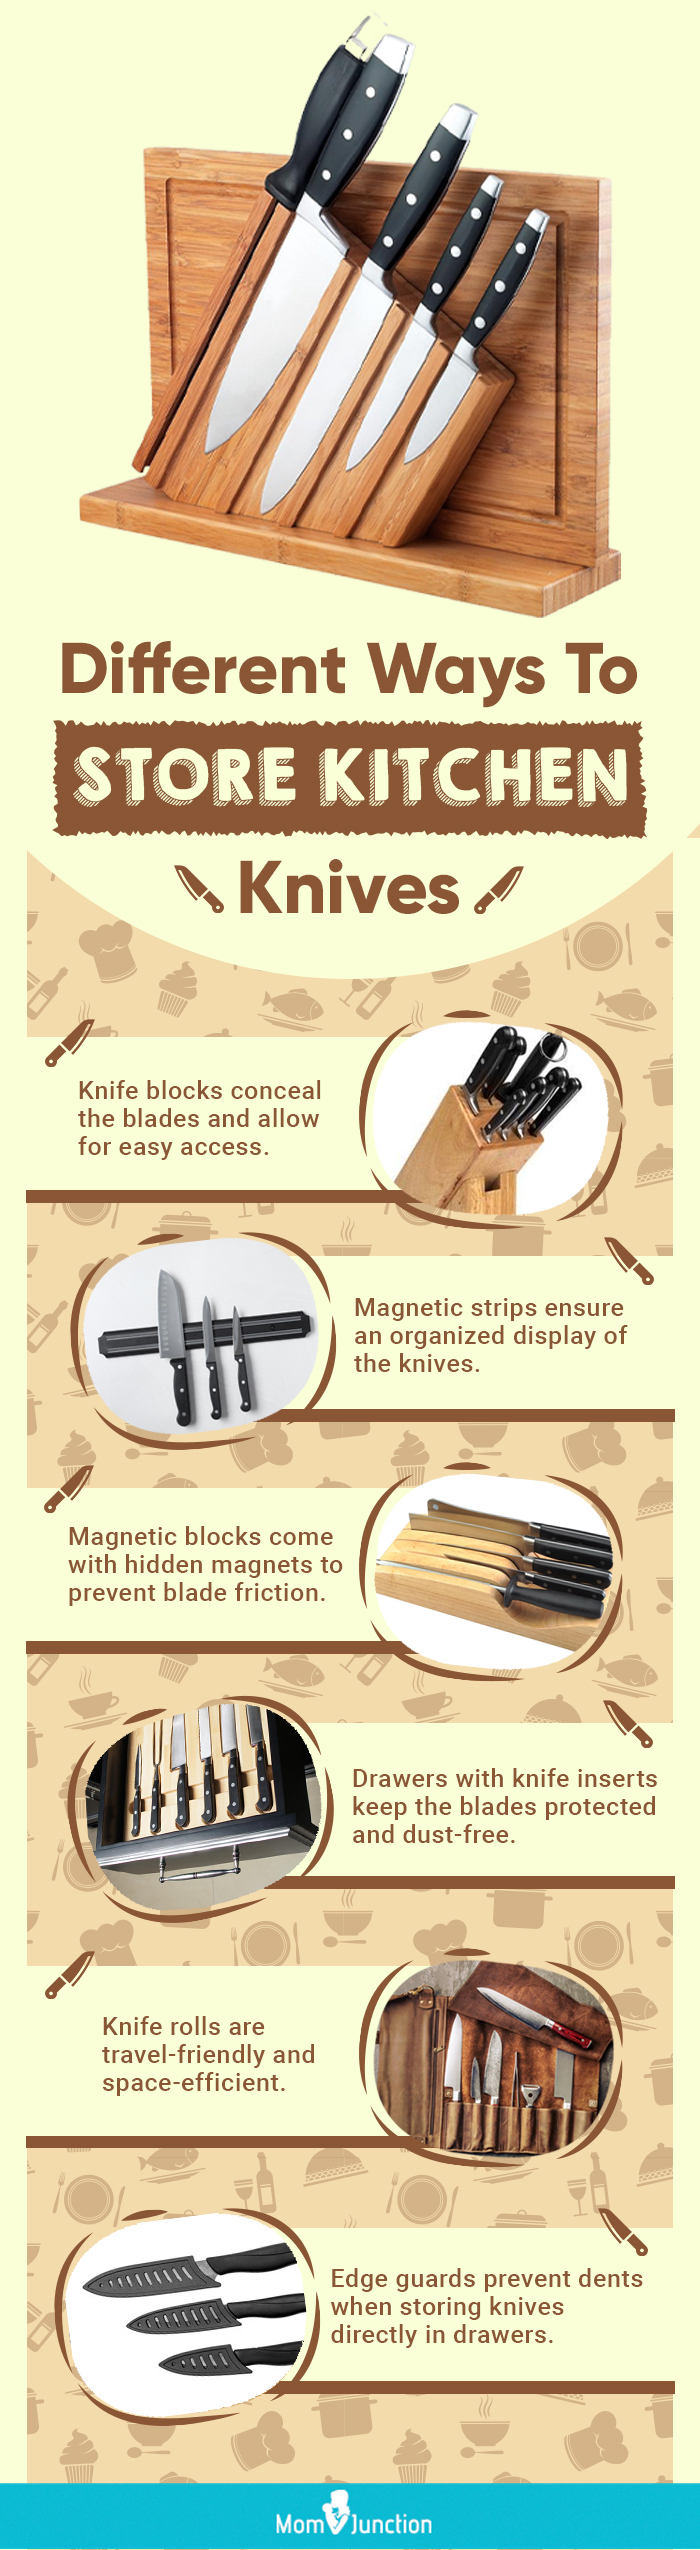 Different Ways To Store Kitchen Knives (infographic)